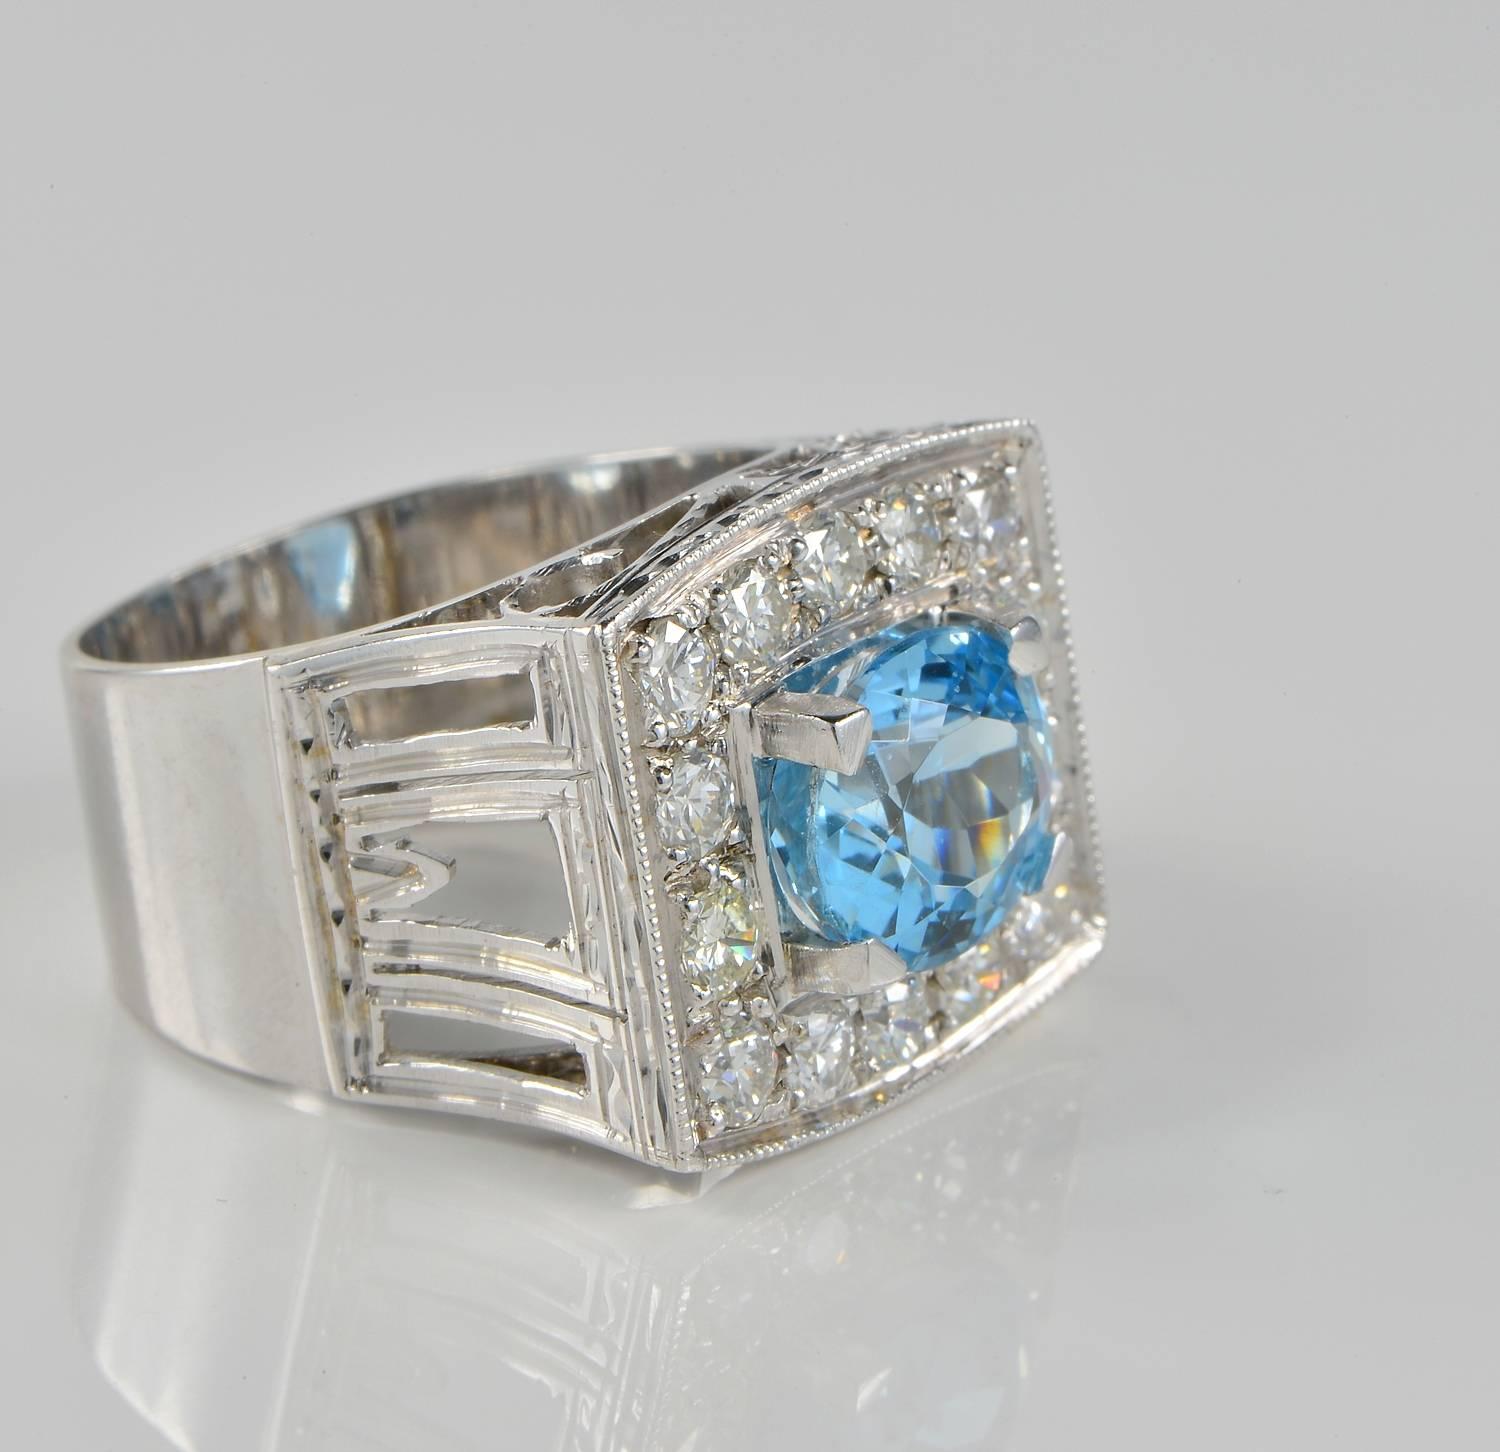 Superb retro ring of highly detailed past workmanship, boasting natural Aquamarine of 3.0 Ct intense deep sky blue full of inner life and great sparkle.
Further bordered by 1.10 Ct of quality round brilliant cut Diamonds rated as G VVS/VS
It has